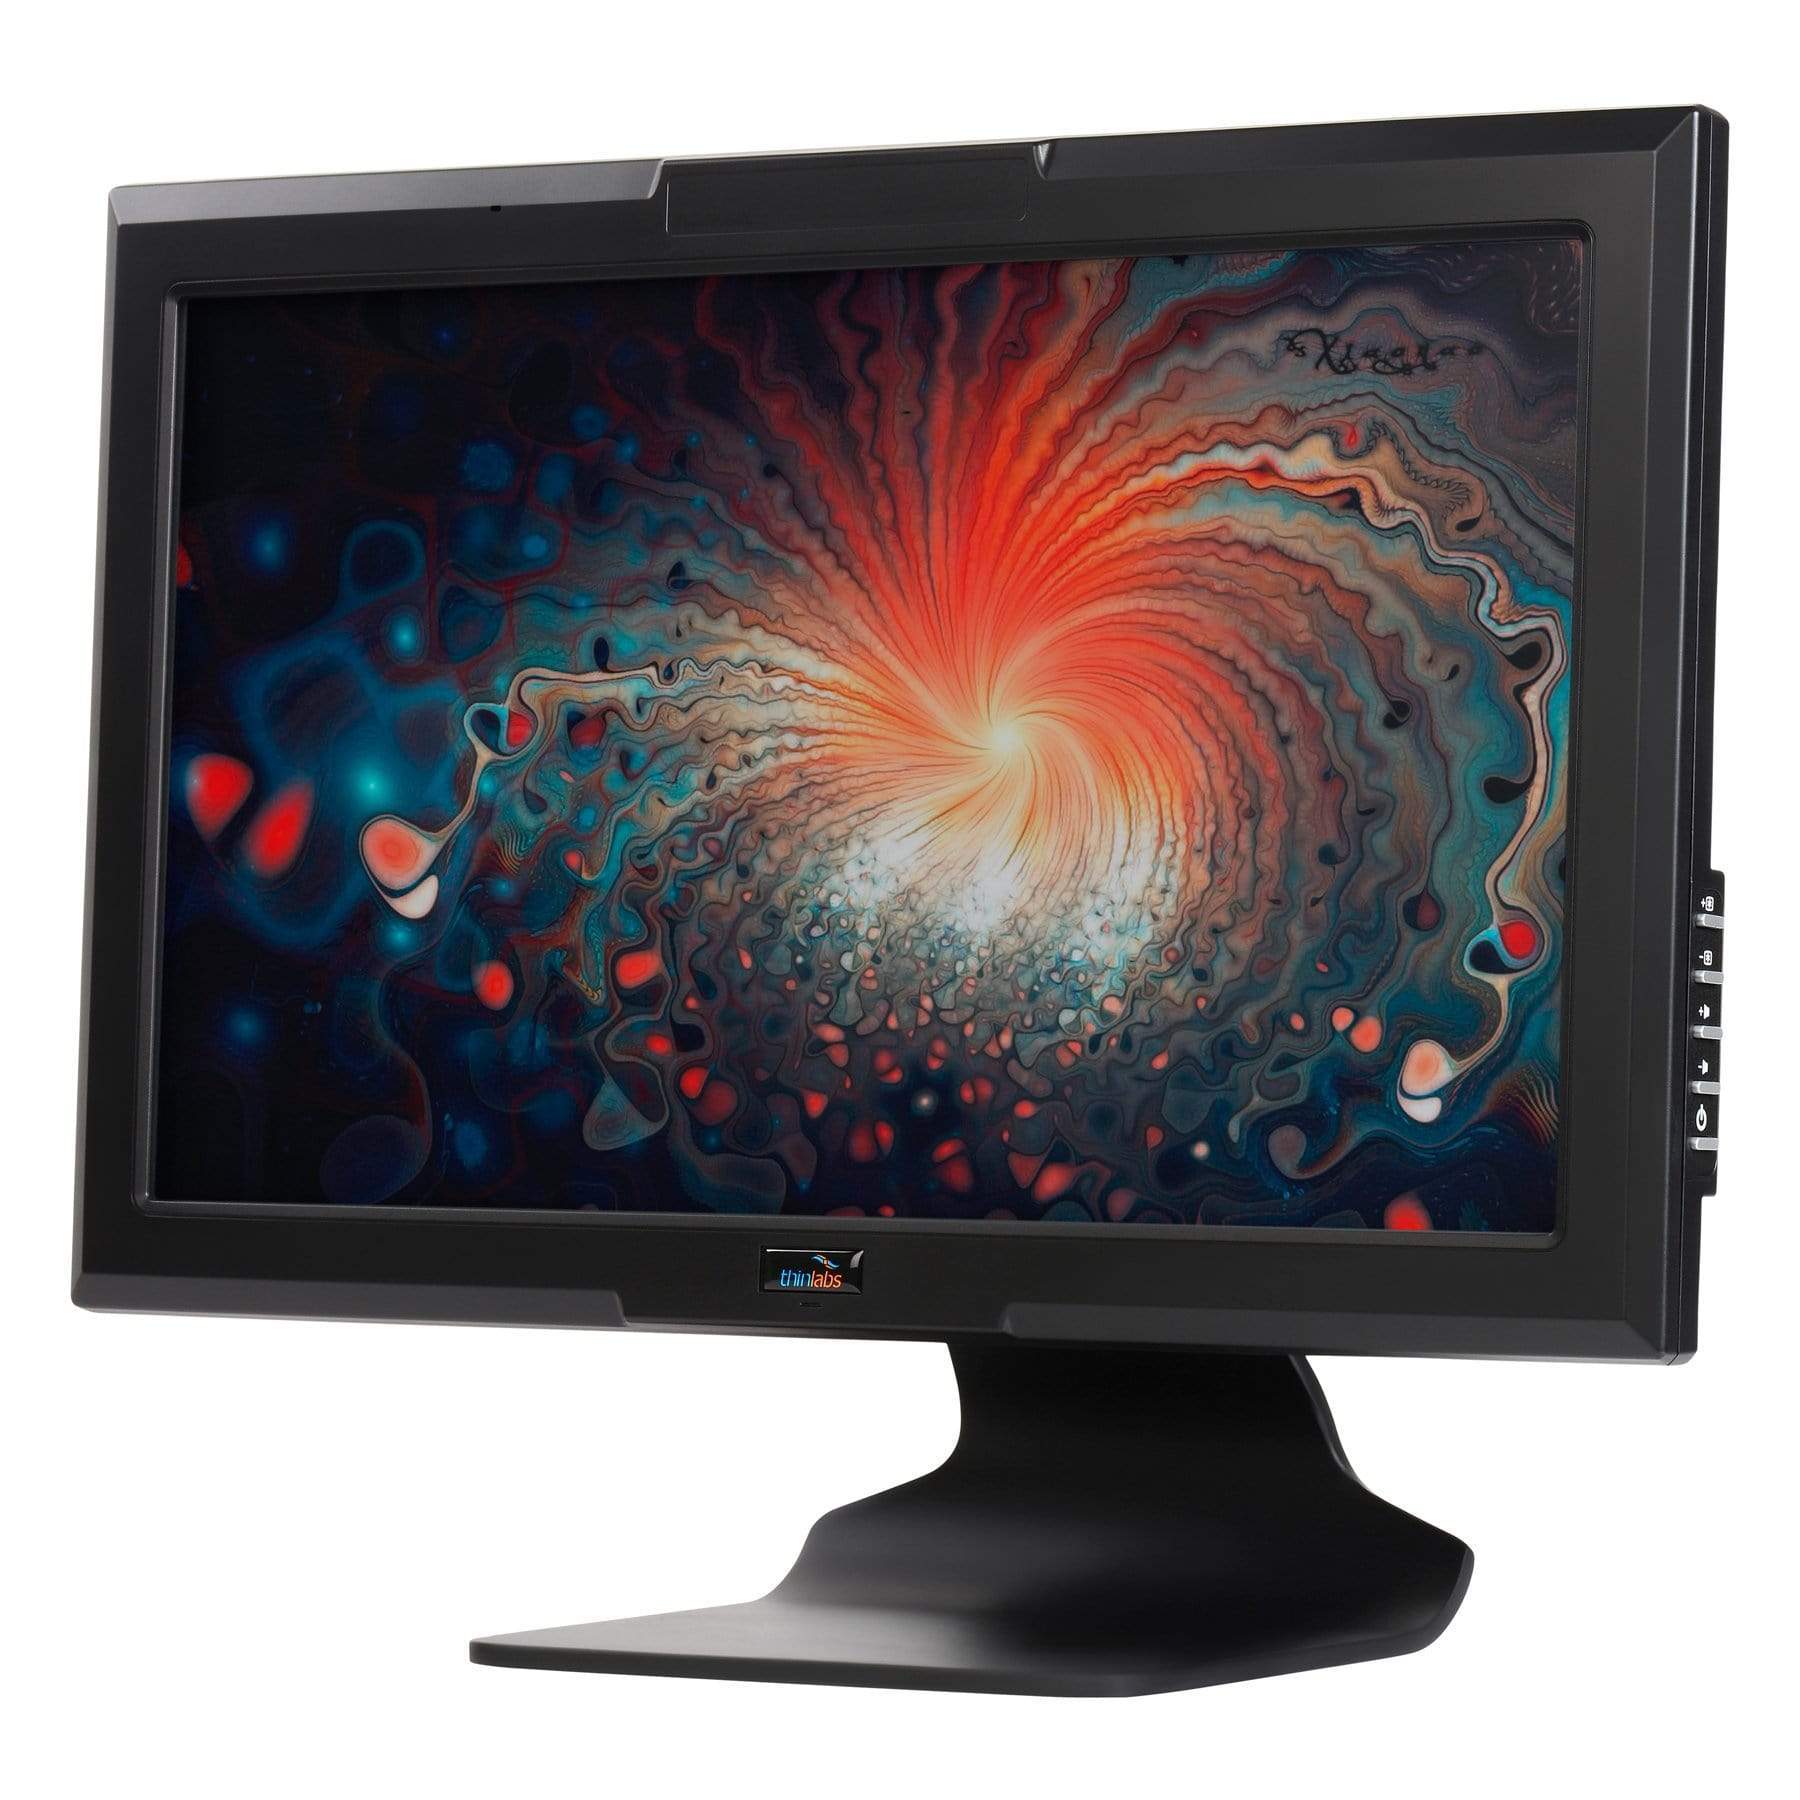 PoE Texas Display HELIOS All-in-One PoE+ pCAP Touchscreen Computer - 19" Desk Top Base, 4GB DDR3 RAM, 64GB mSATA